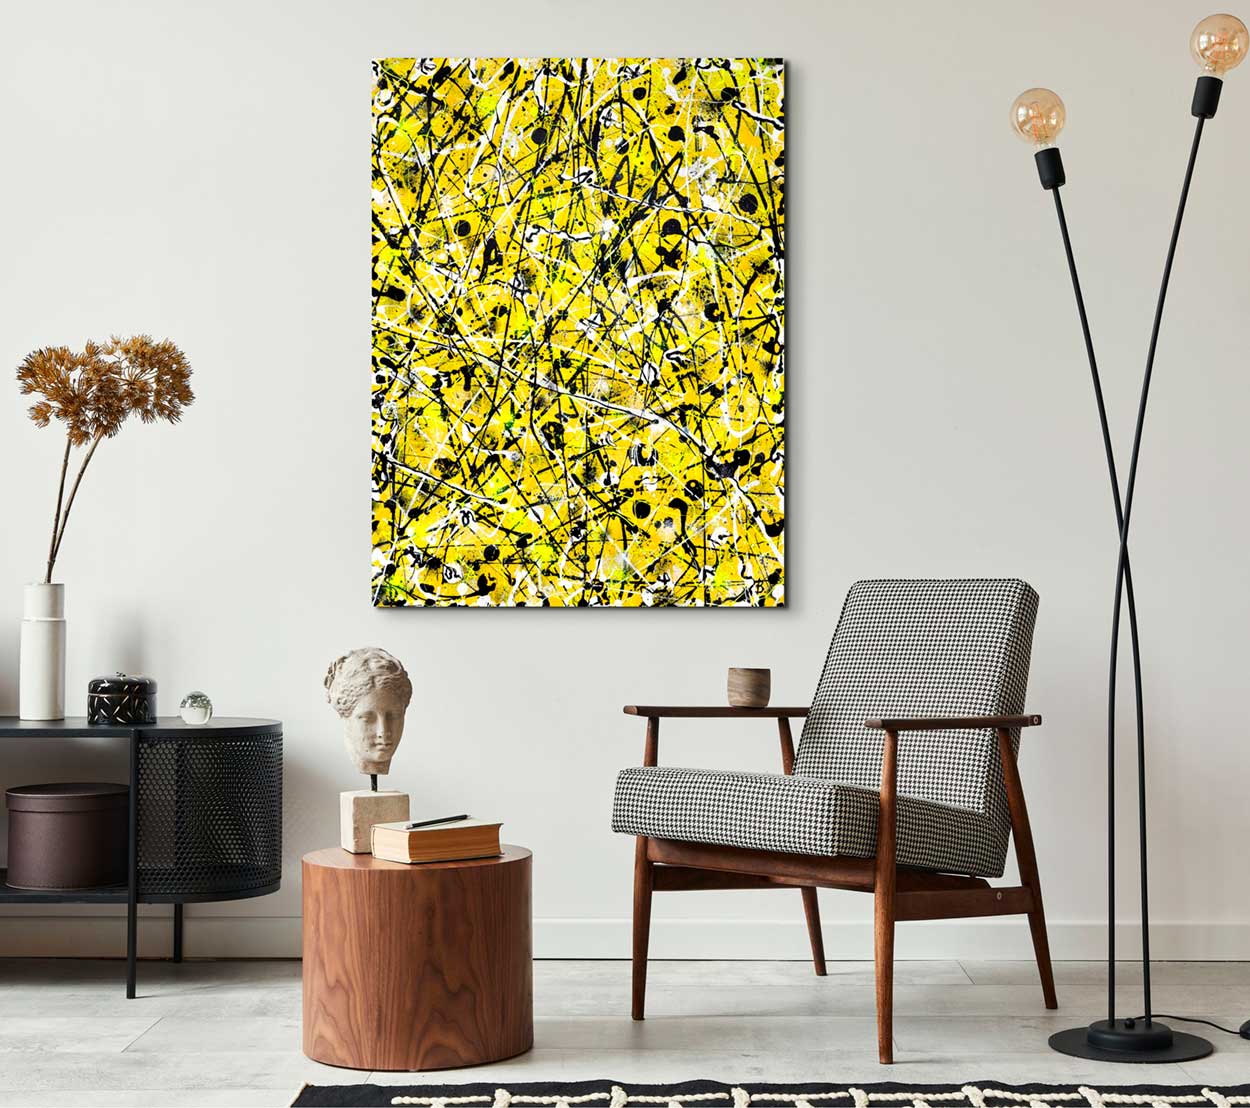 Beehive, original abstract expressionism painting without external frame seen hanging in a living room. Artwork painted by Bridget Bradley, Abstract Artist, Australia